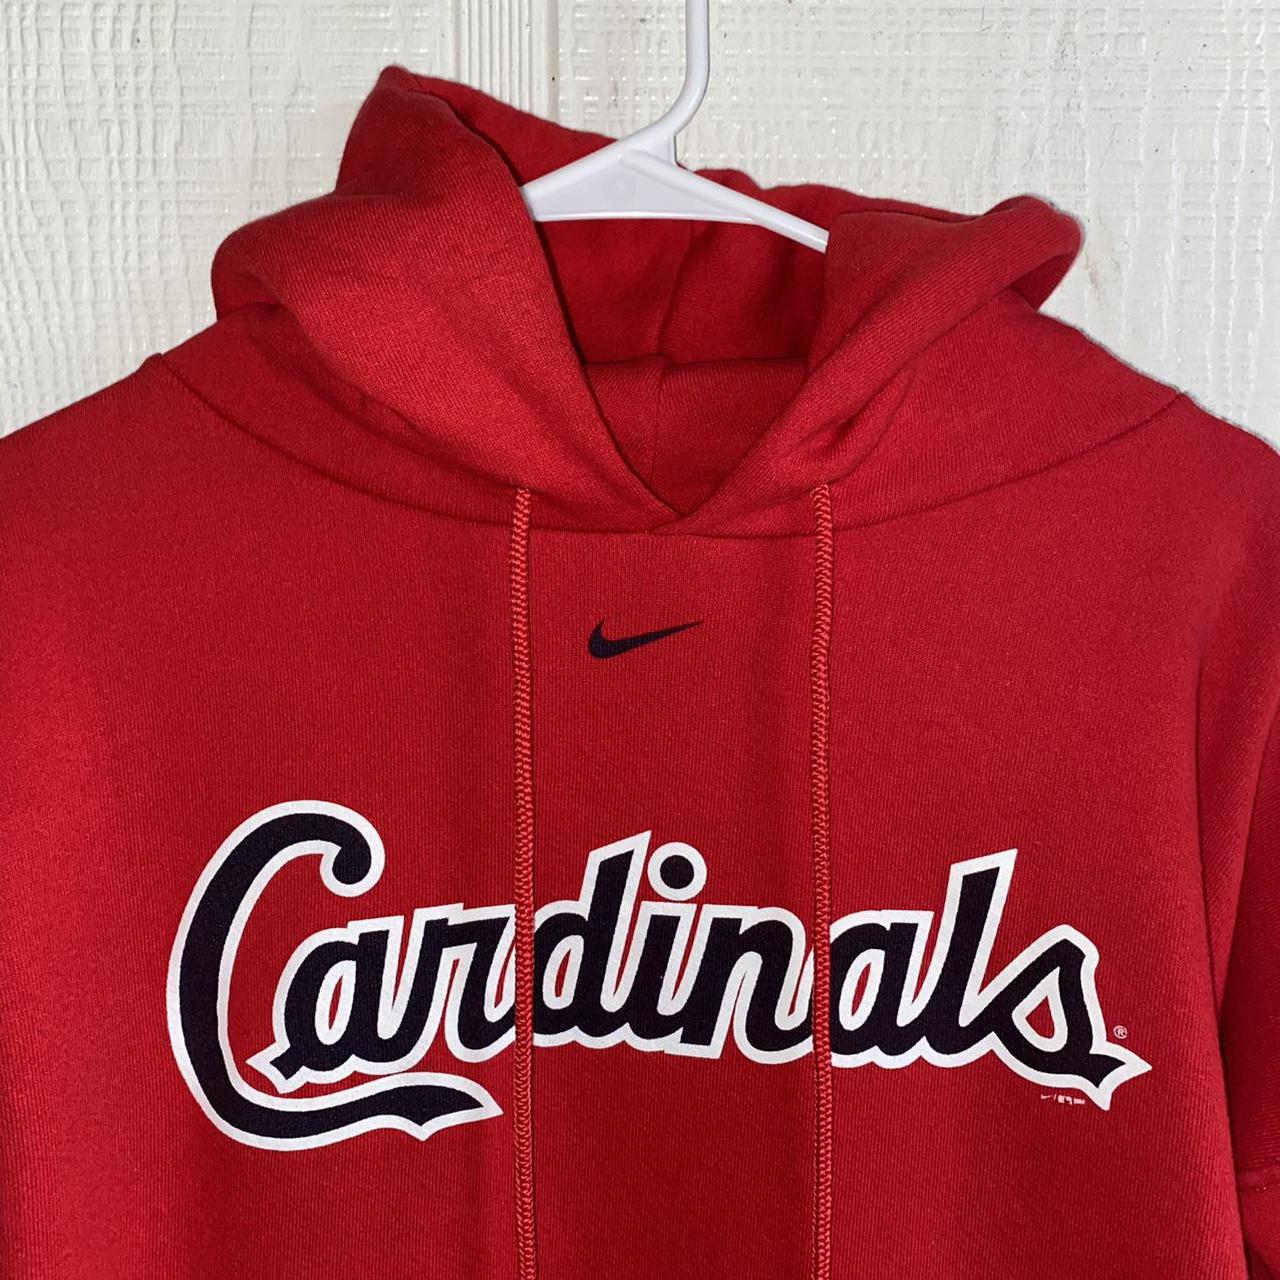 Product Image 2 - Nike st.Louis cardinals hoodie
FREE SHIPPING
Size